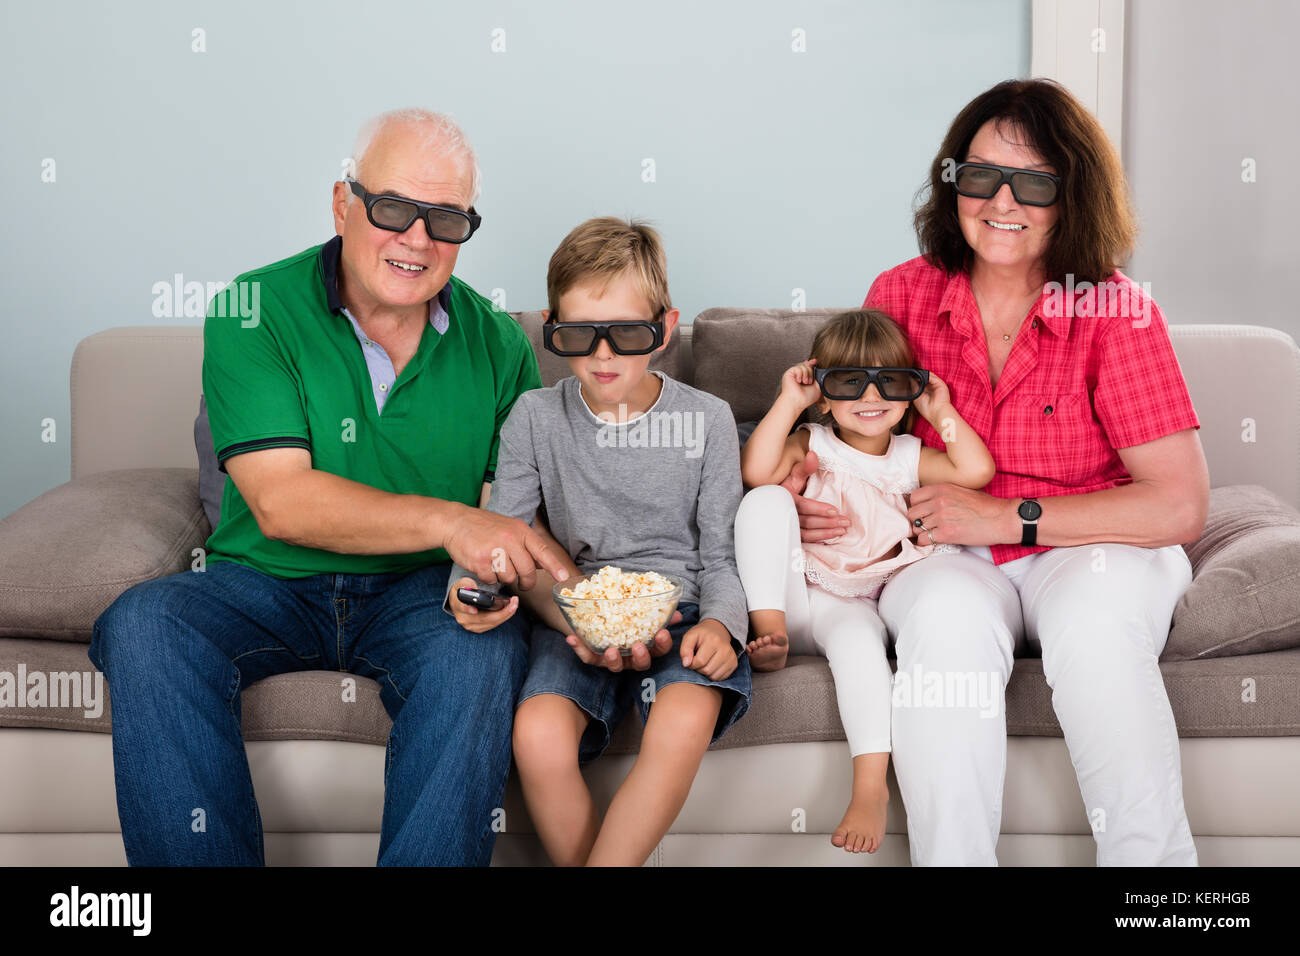 Family Entertaining Watching 3D TV At Home With Kids Stock Photo